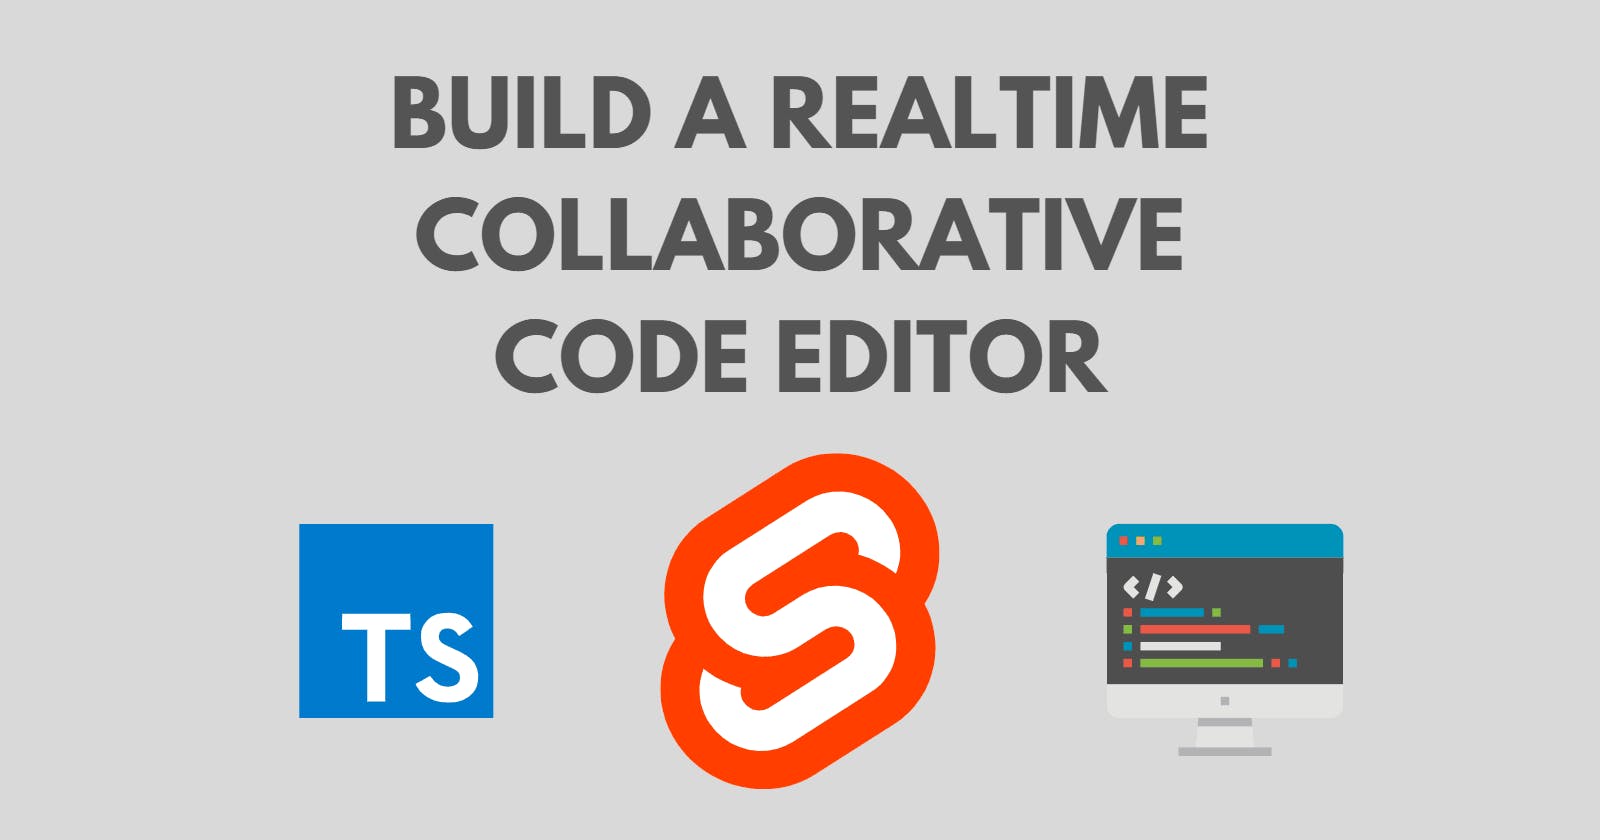 Build a Realtime Collaborative Code Editor with Svelte